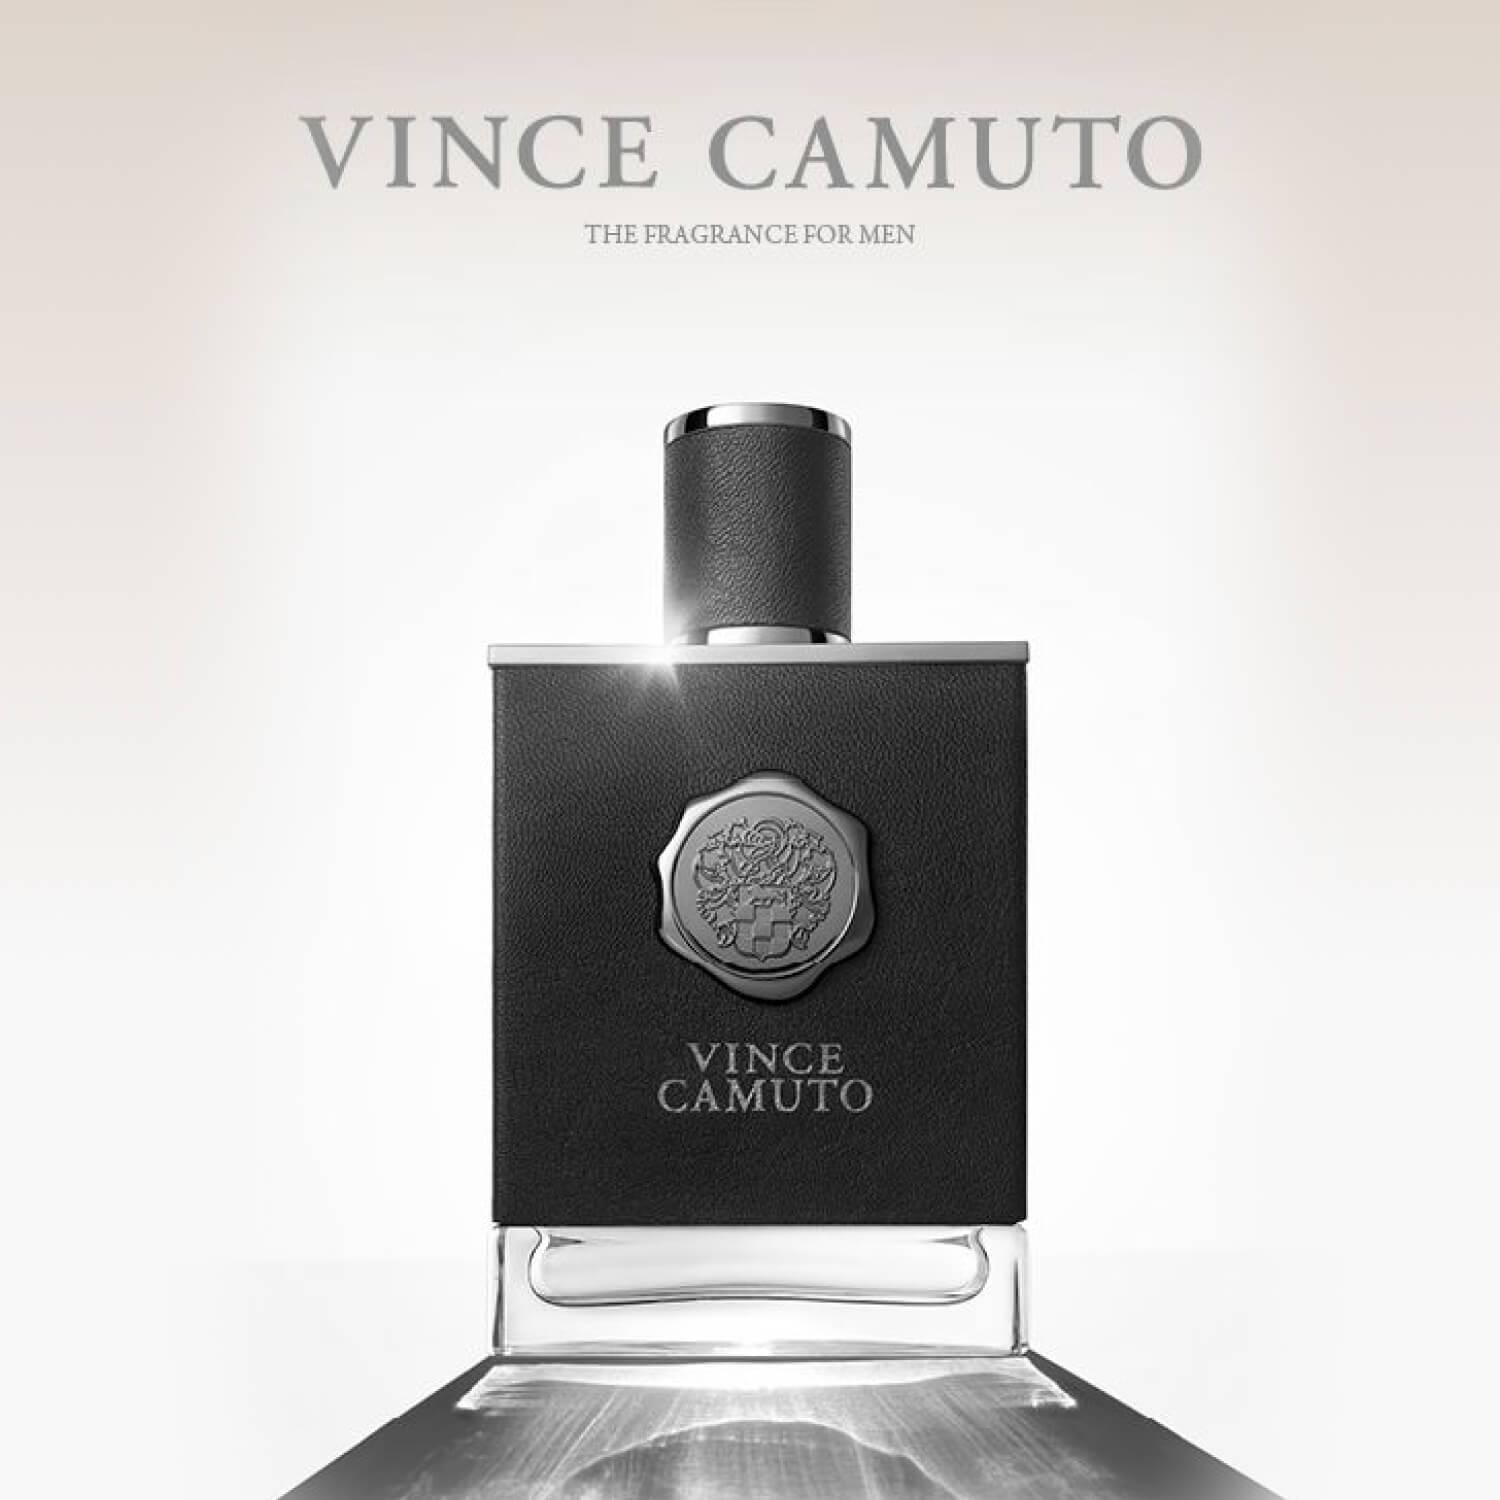 Vince Camuto Perfume & Cologne Subscription